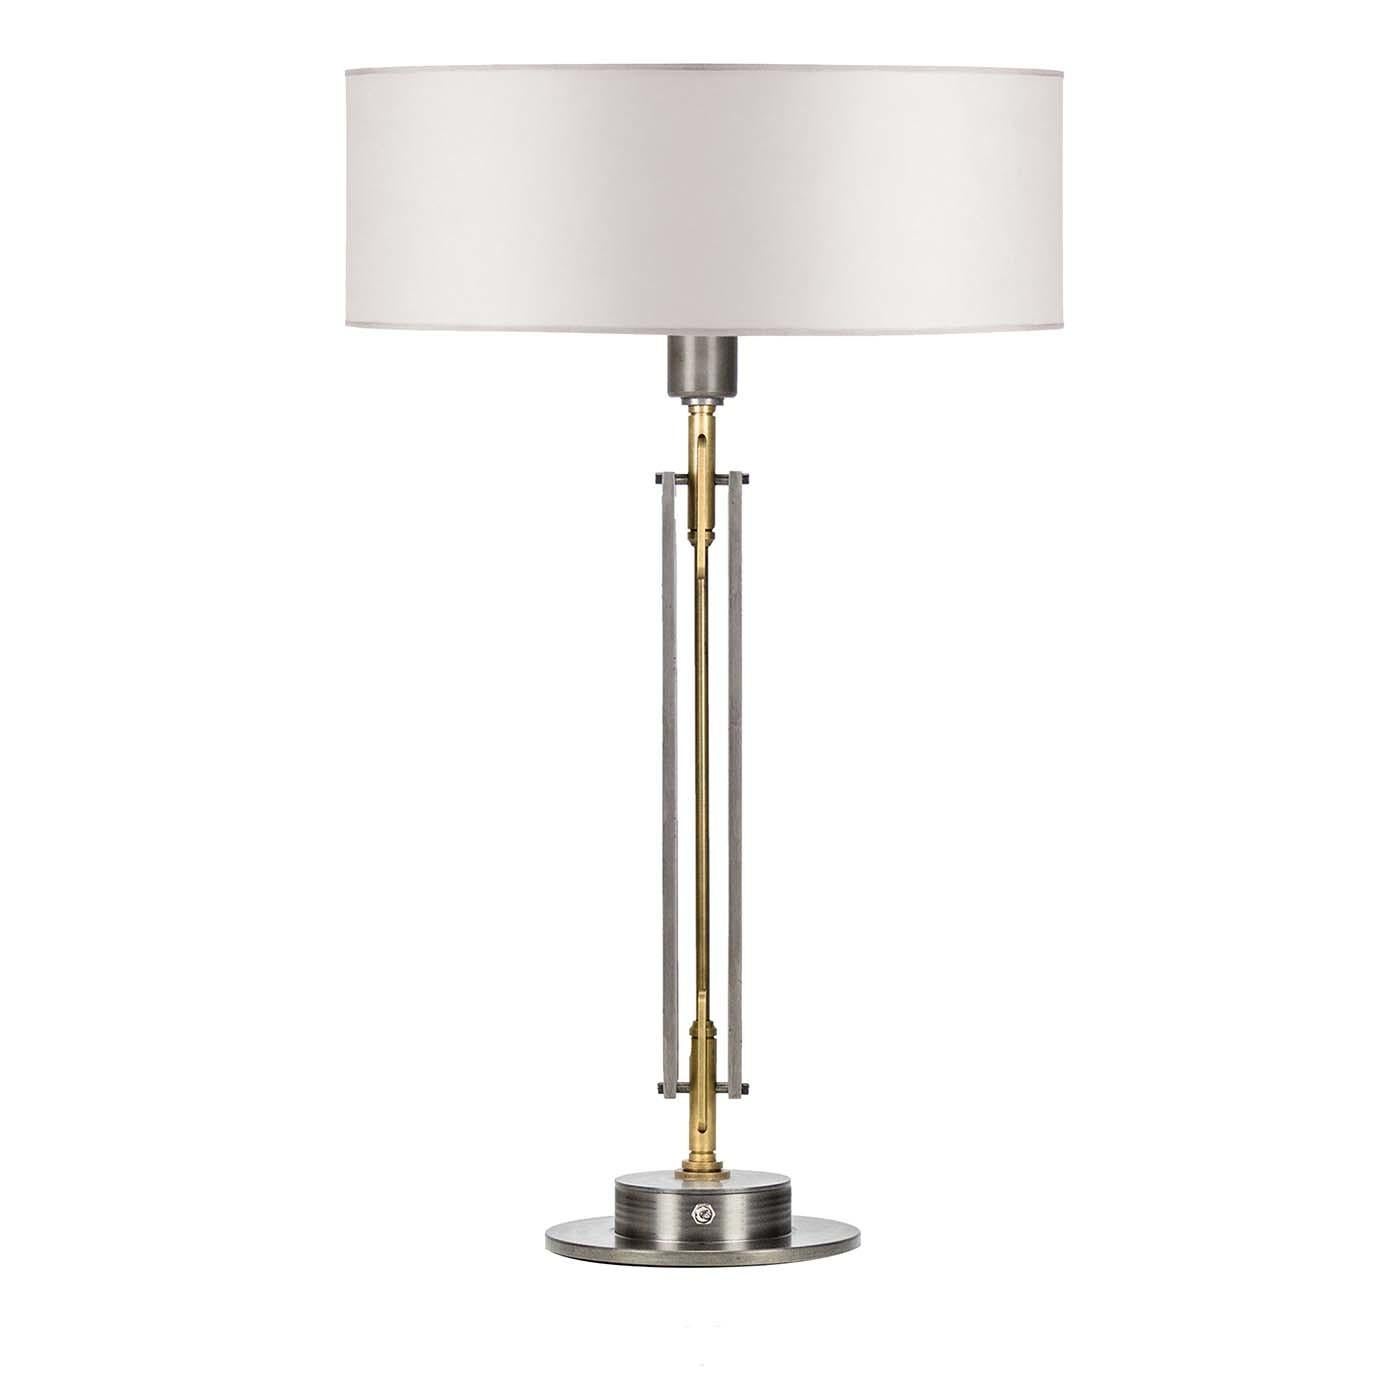 Italian Lenmo White Table Lamp #1 by Acanthus